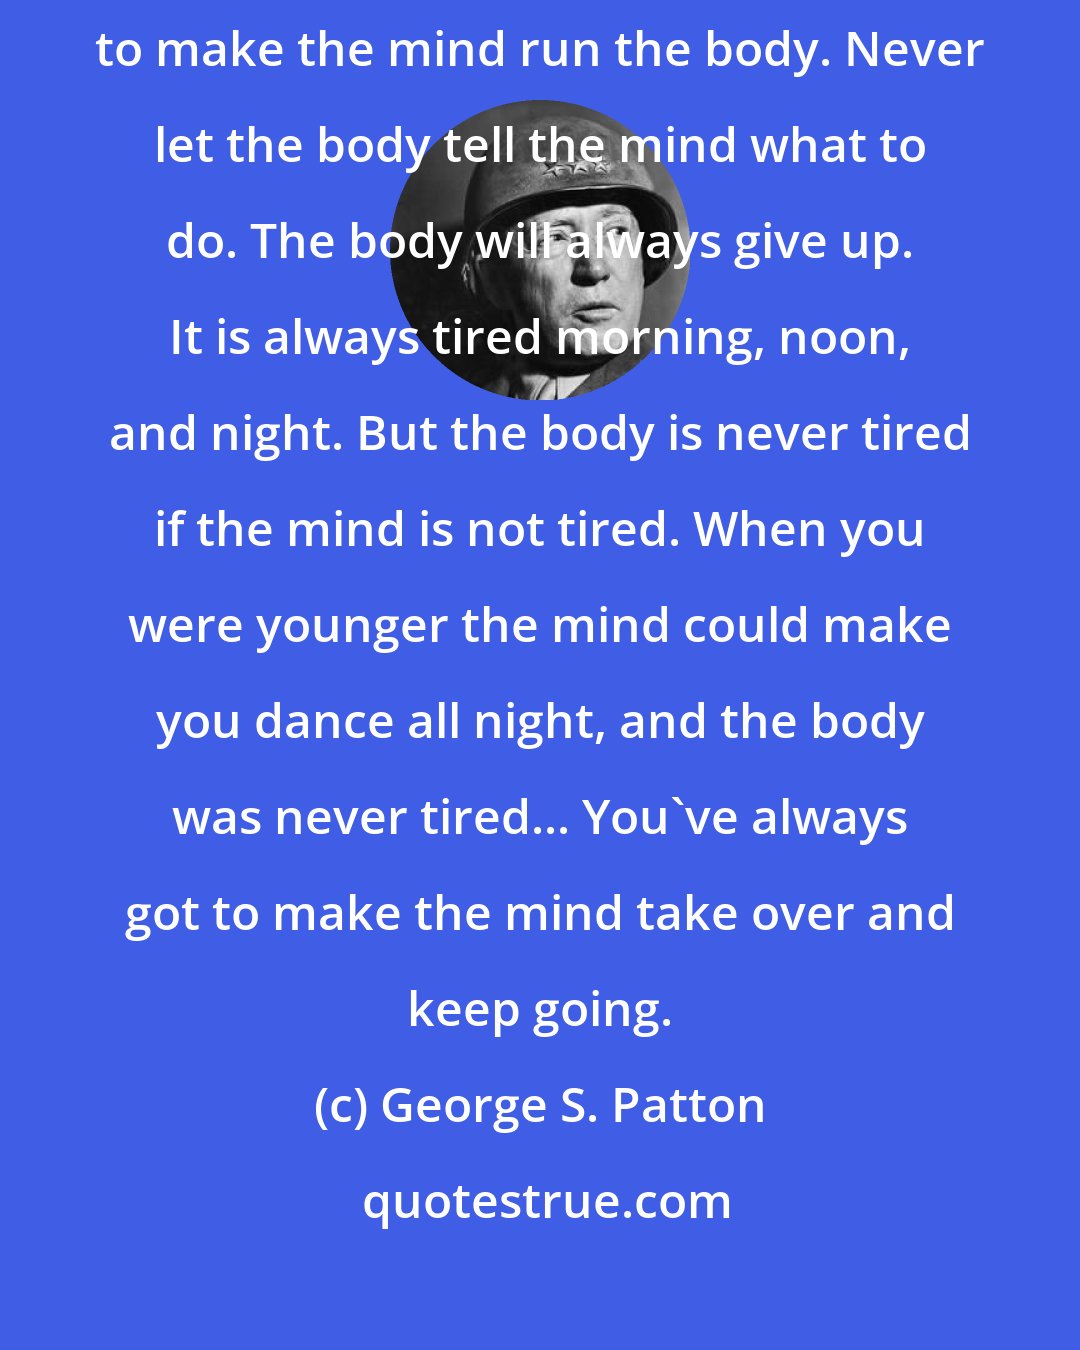 George S. Patton: Now if you are going to win any battle you have to do one thing. You have to make the mind run the body. Never let the body tell the mind what to do. The body will always give up. It is always tired morning, noon, and night. But the body is never tired if the mind is not tired. When you were younger the mind could make you dance all night, and the body was never tired... You've always got to make the mind take over and keep going.